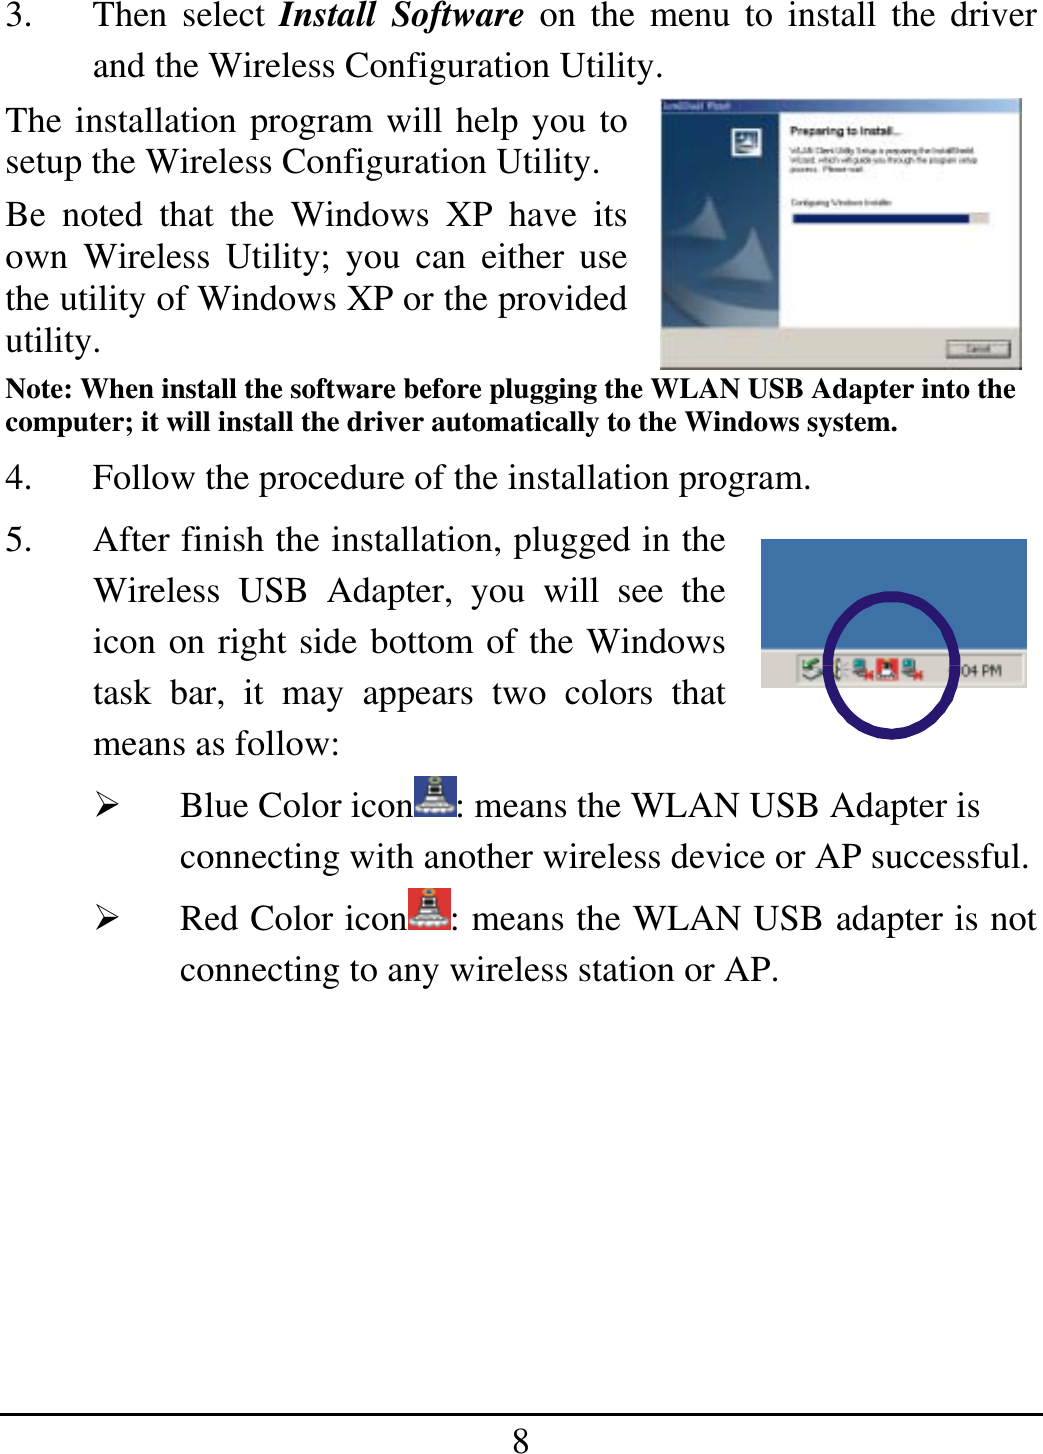 8 3. Then select Install Software on the menu to install the driver and the Wireless Configuration Utility. The installation program will help you to setup the Wireless Configuration Utility. Be noted that the Windows XP have its own Wireless Utility; you can either use the utility of Windows XP or the provided utility. Note: When install the software before plugging the WLAN USB Adapter into the computer; it will install the driver automatically to the Windows system. 4.  Follow the procedure of the installation program. 5.  After finish the installation, plugged in the Wireless USB Adapter, you will see the icon on right side bottom of the Windows task bar, it may appears two colors that means as follow:   Blue Color icon : means the WLAN USB Adapter is connecting with another wireless device or AP successful.   Red Color icon : means the WLAN USB adapter is not connecting to any wireless station or AP.        